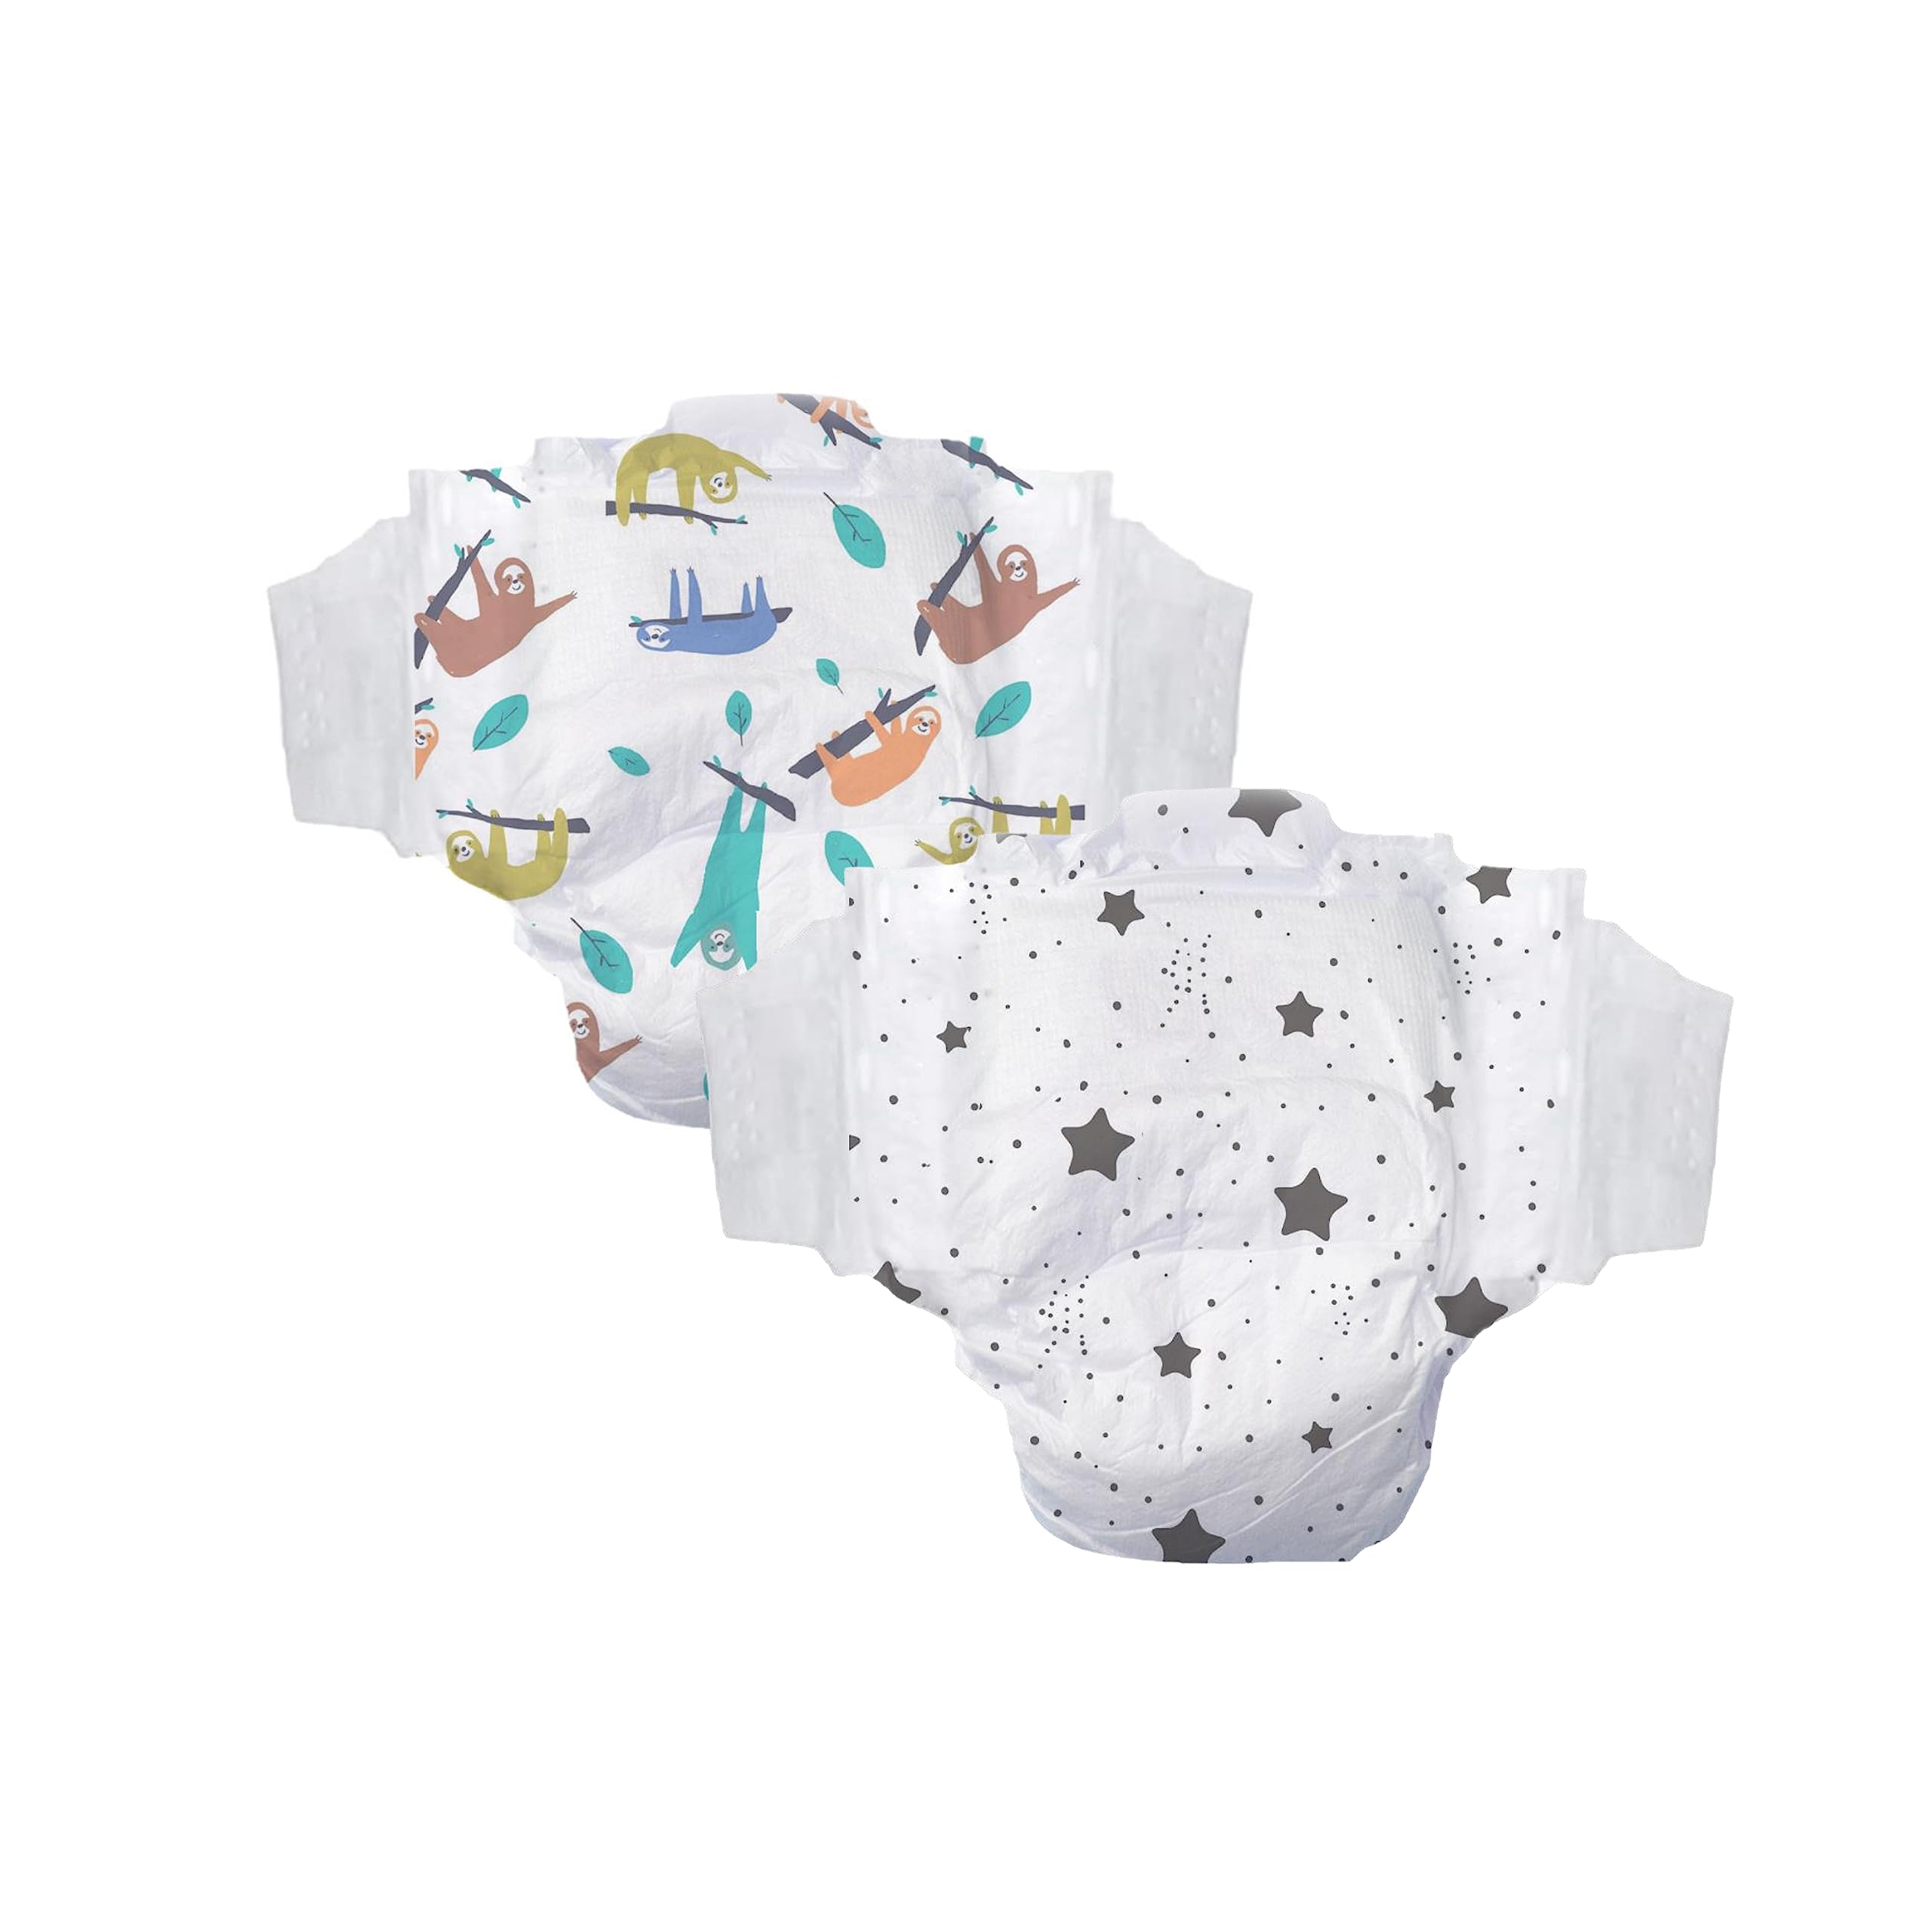 Hello Bello Diapers, Size NB (Up to 10 lbs) - 96 Count of Premium Disposable Baby Diapers in Umbrella & Koala Kids Designs - Hypoallergenic with Soft, Cloth-Like Feel